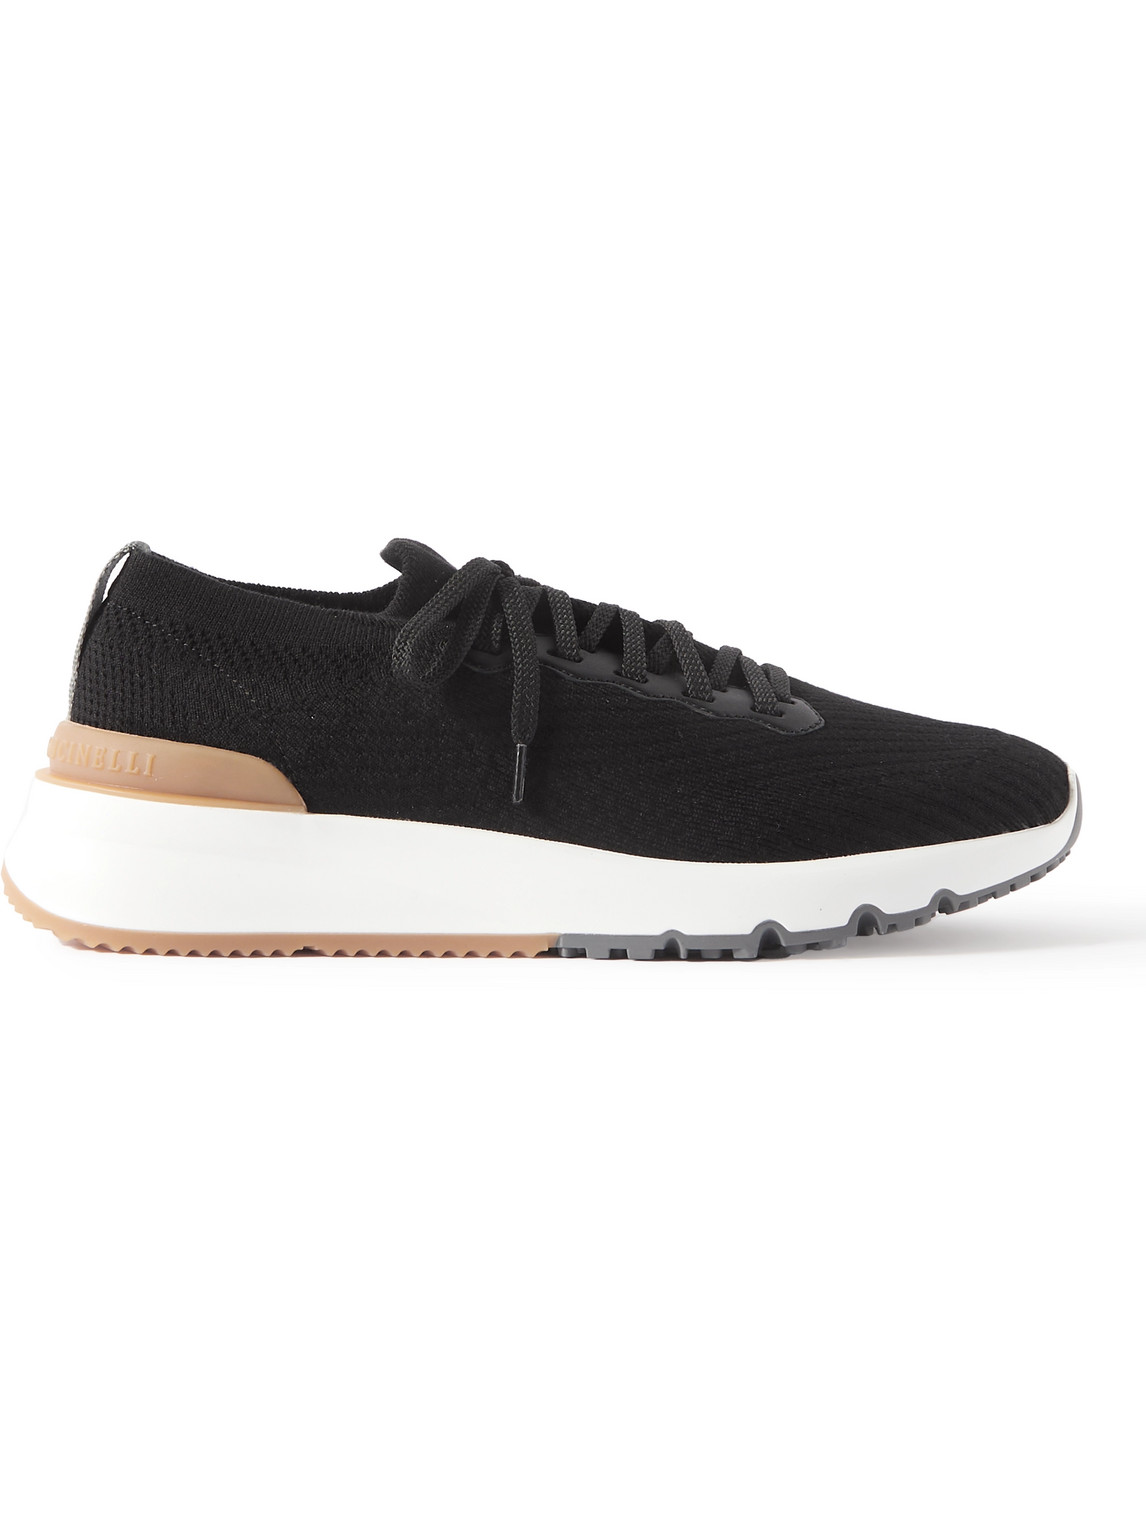 Brunello Cucinelli Leather-trimmed Stretch-knit Sneakers In Black